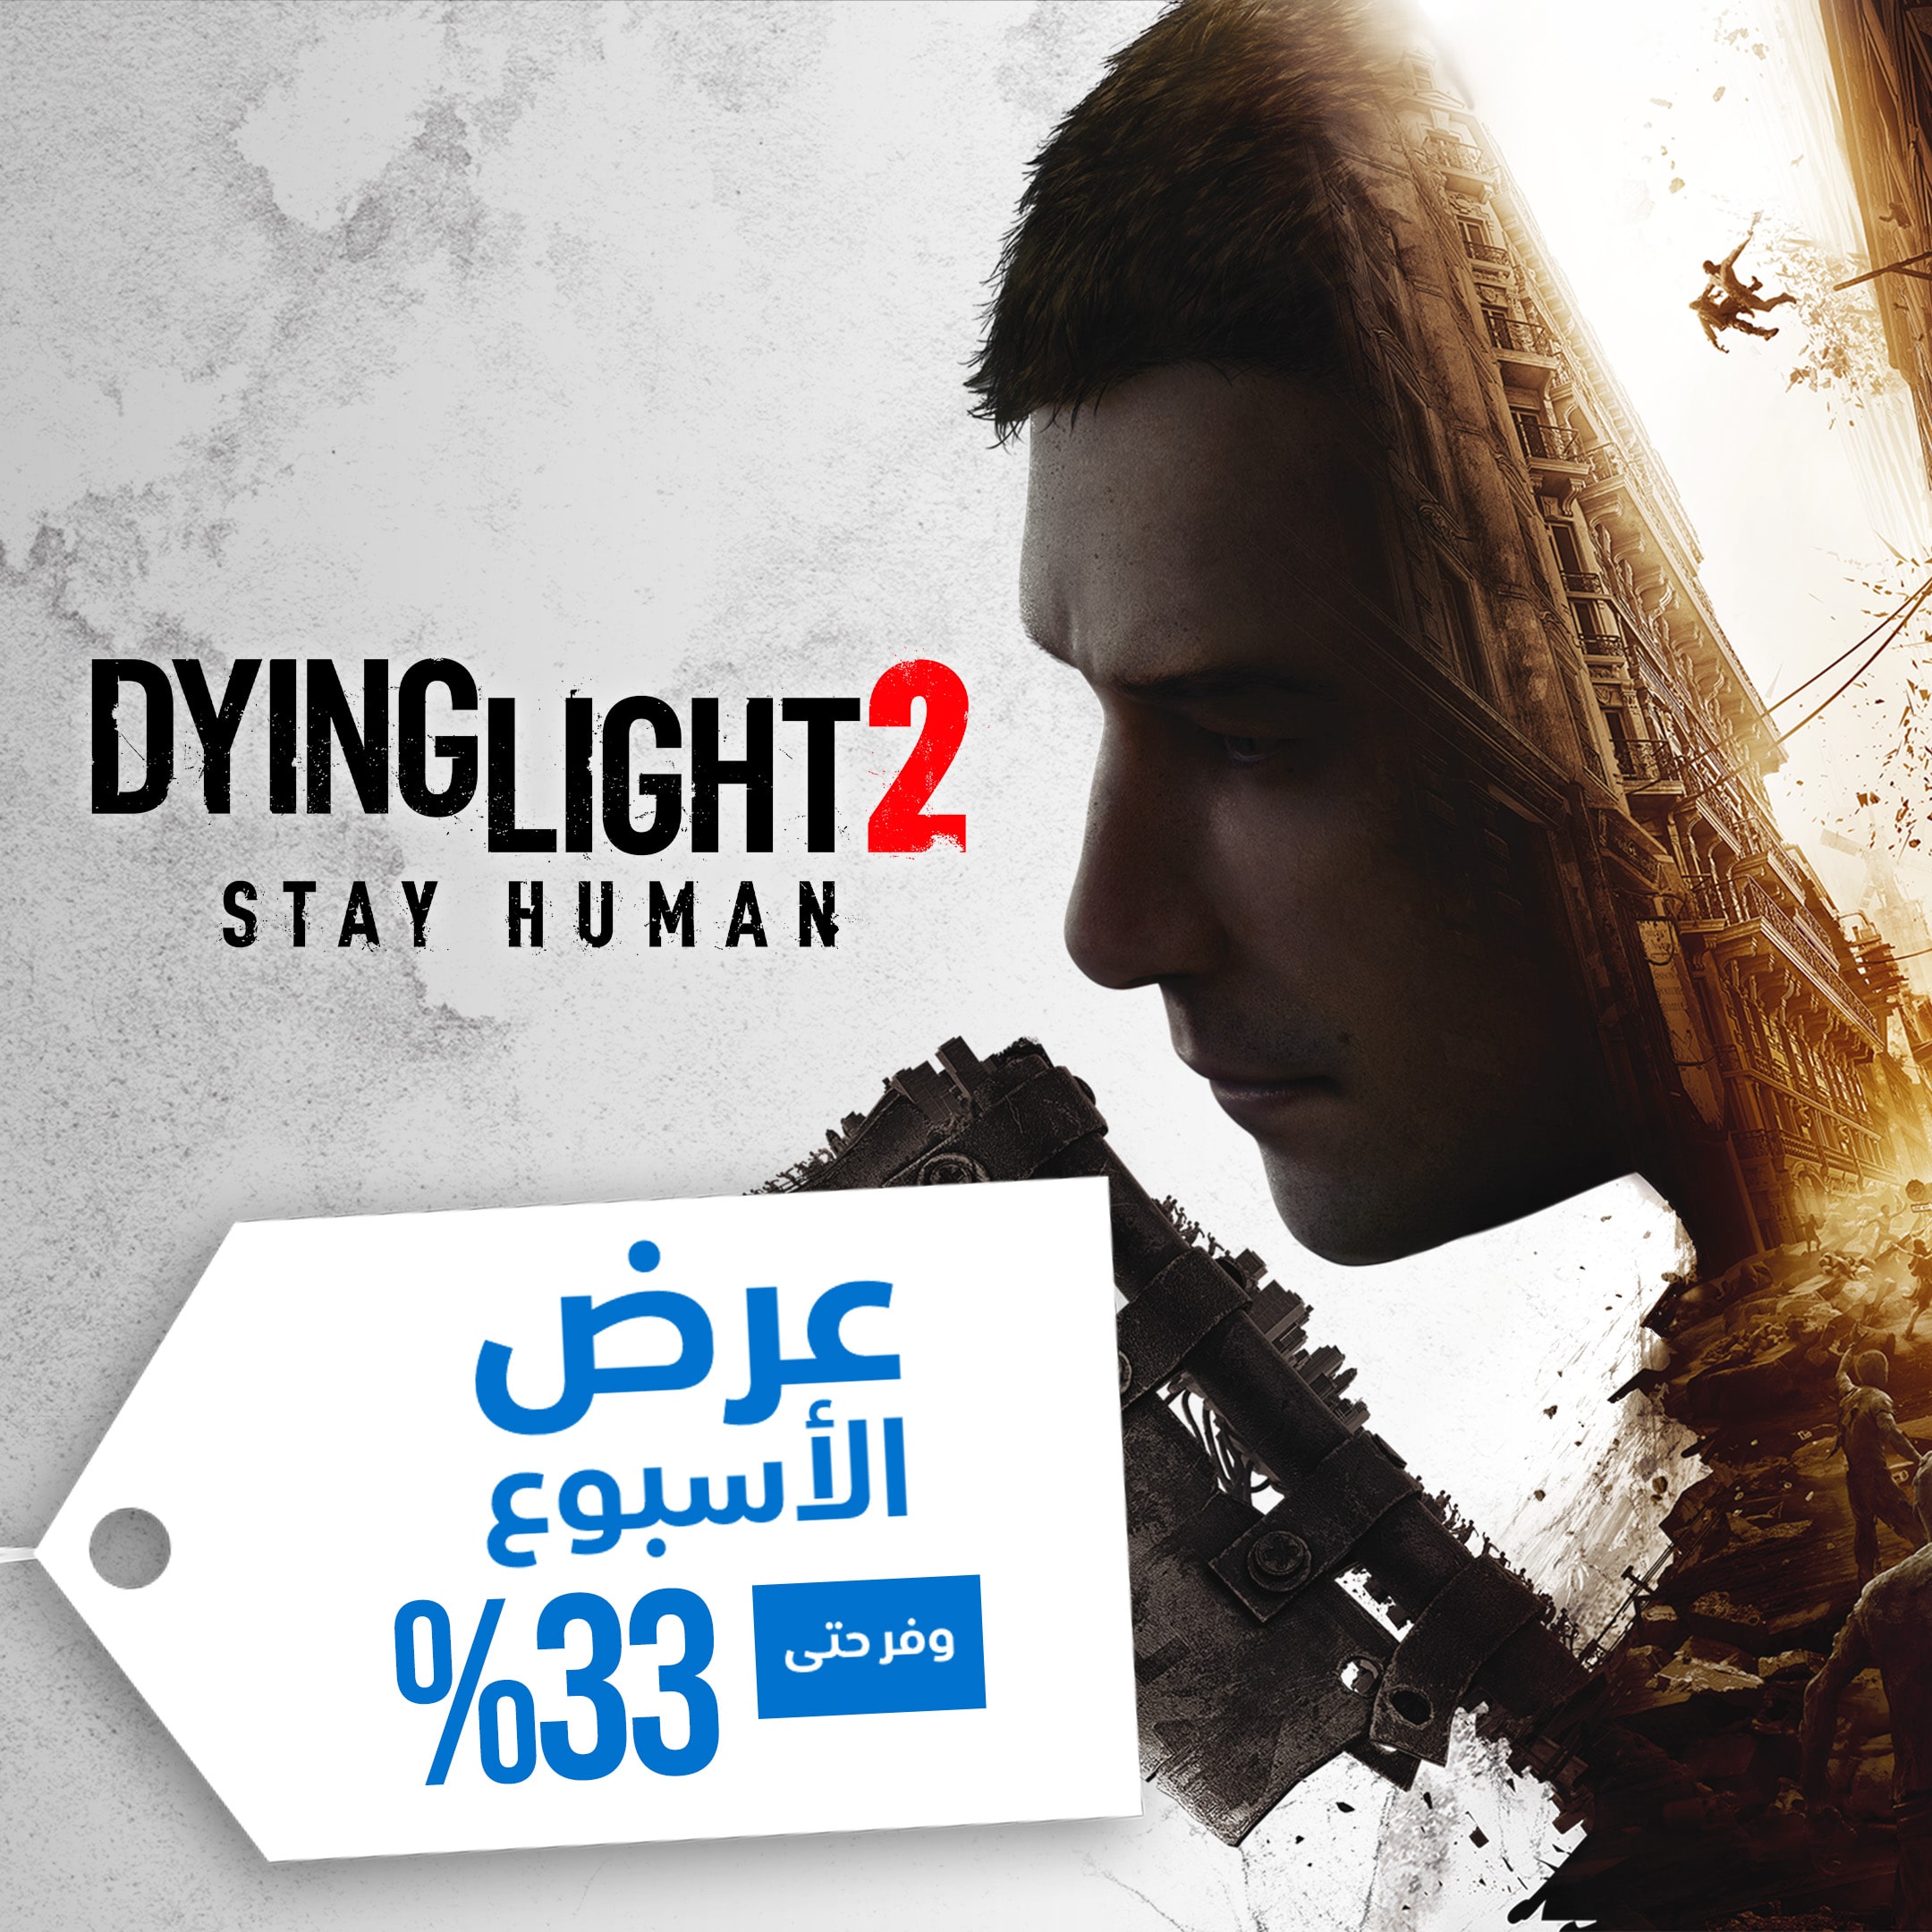 [PROMO] Deal of the Week - Dying Light 2